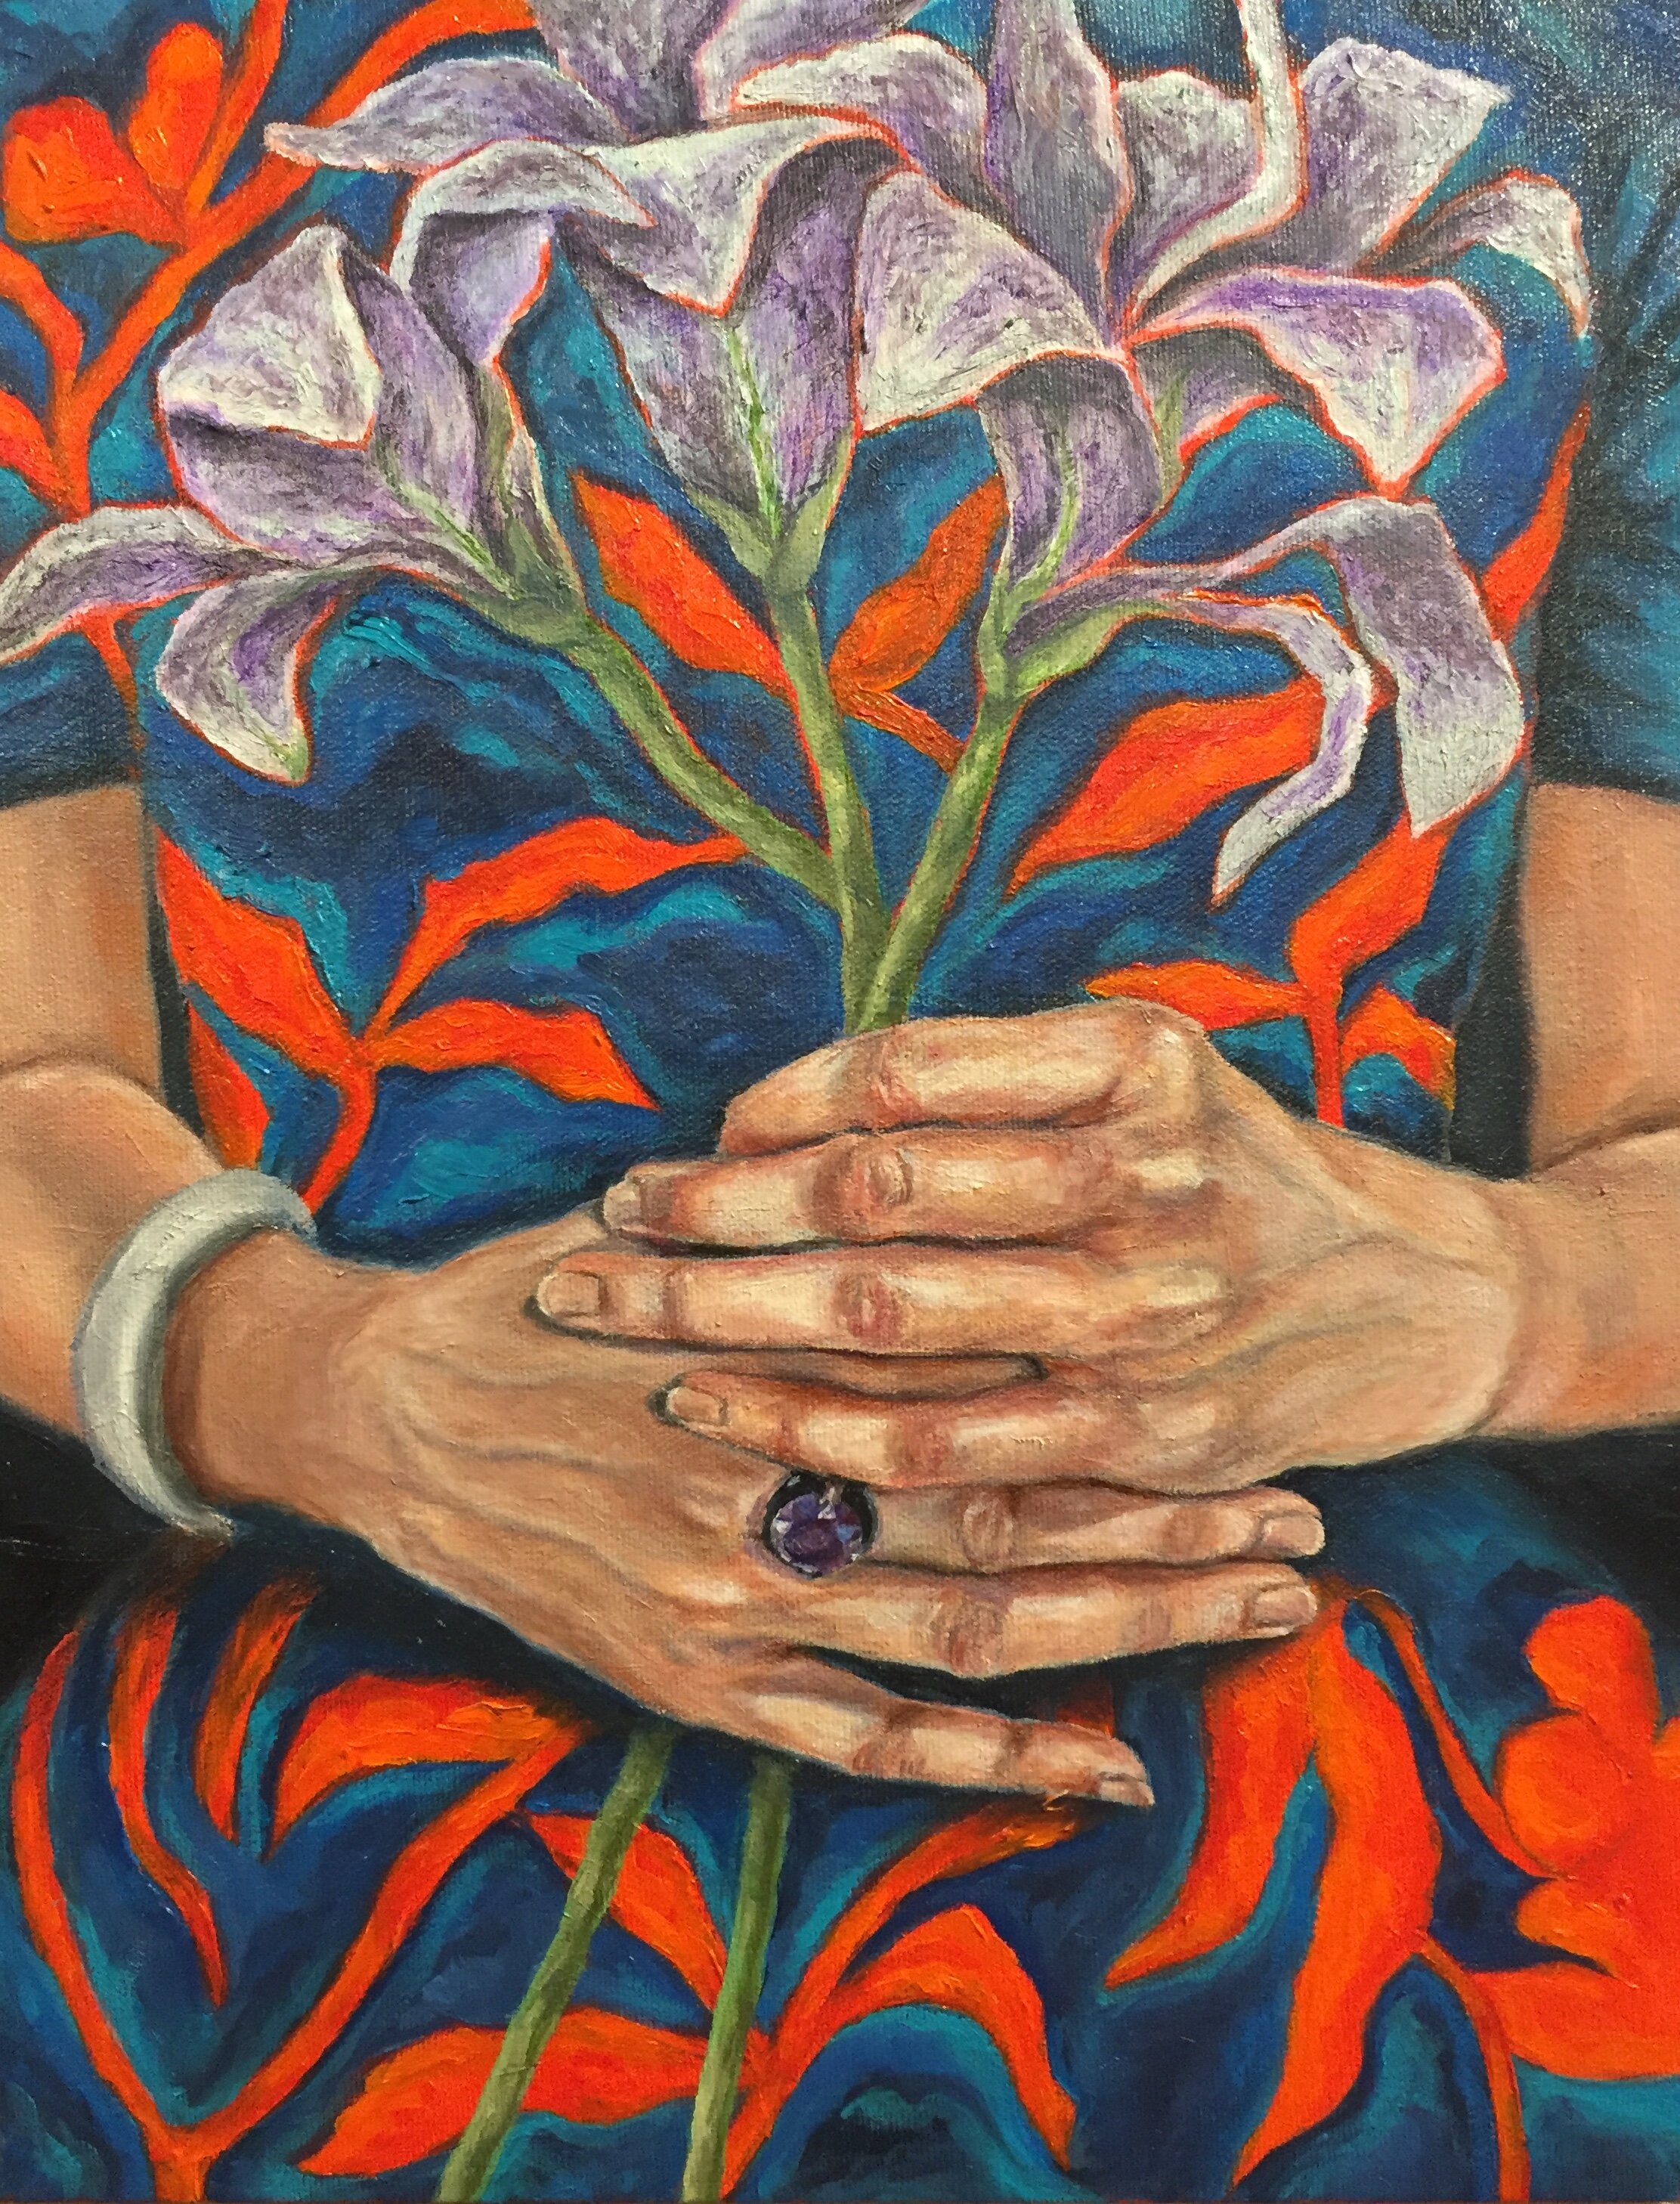 Her Hands, 2019, 11x14" Oil on canvas